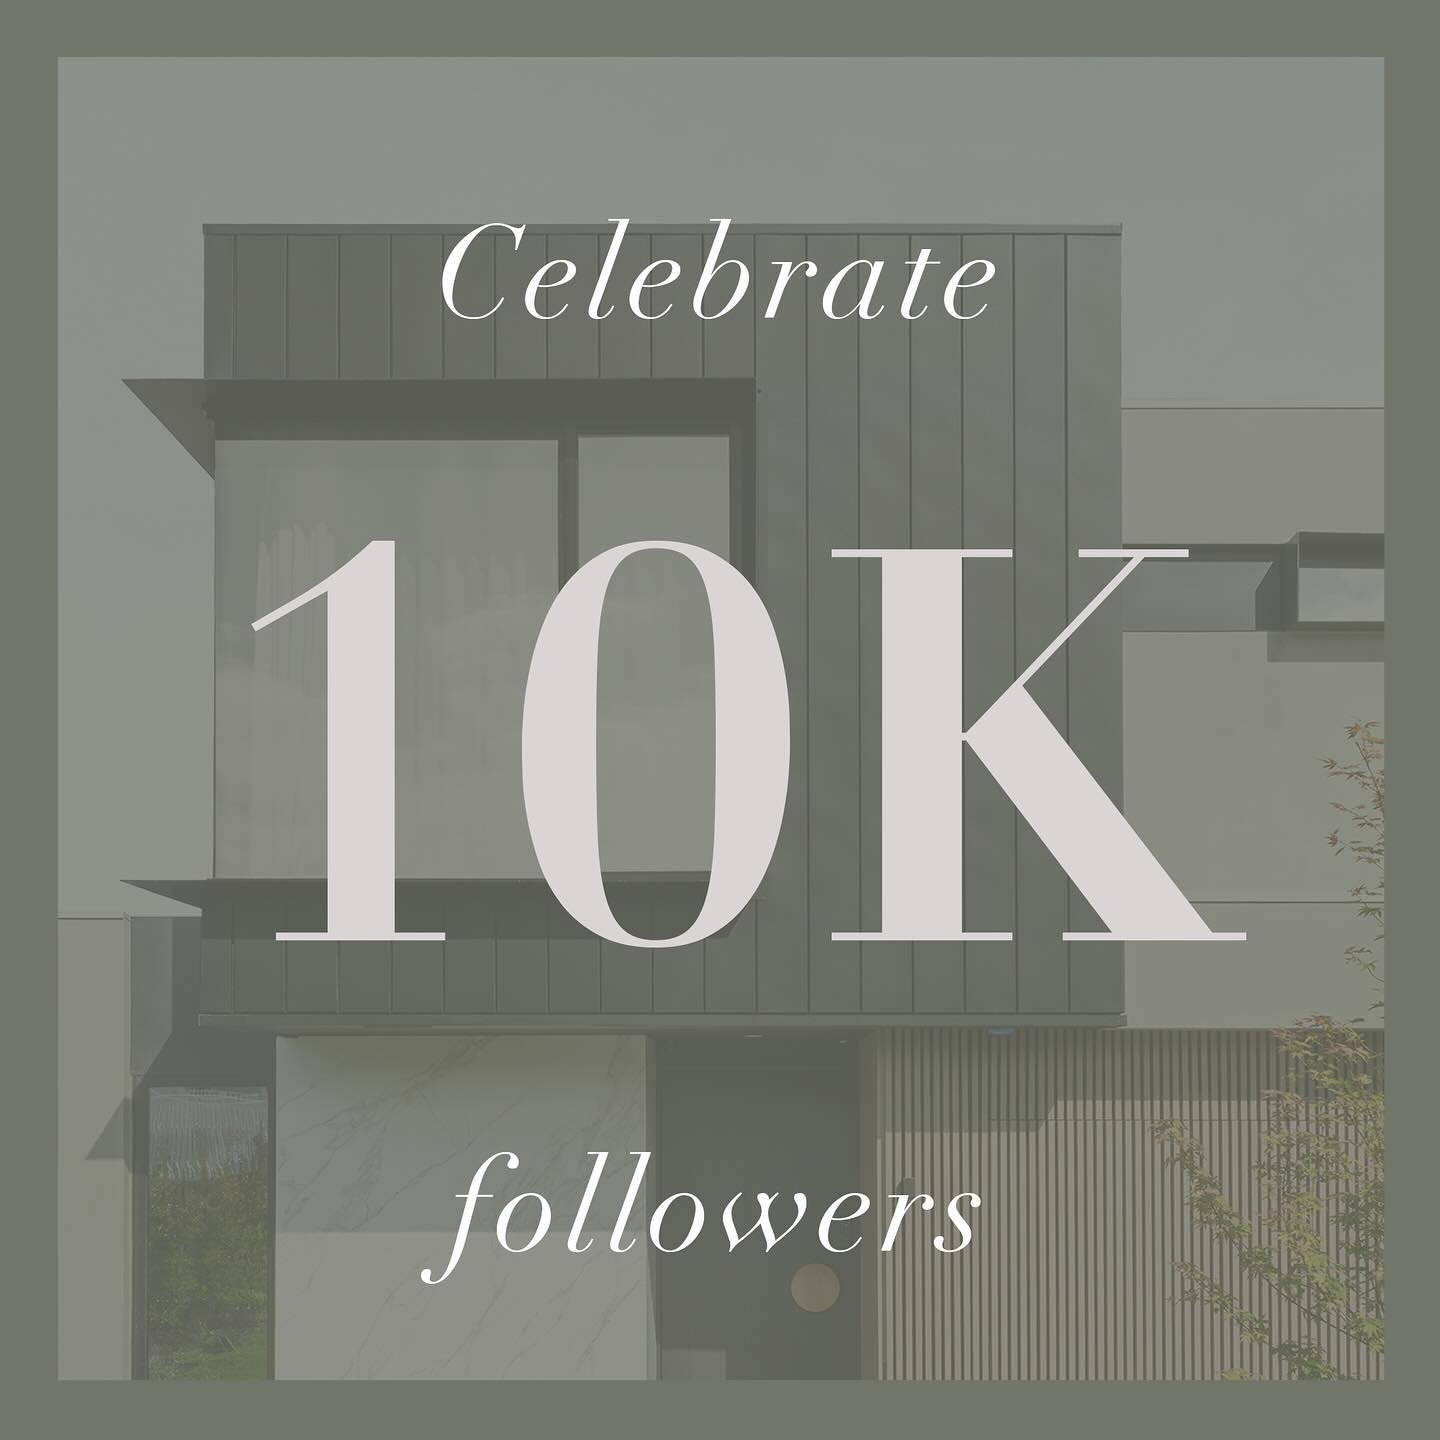 Mink Homes have hit an incredible milestone of 10,000 followers, and we are so very grateful for your unwavering support! Your engagement and positivity have shaped our 
community into something truly special. 🌟

Every follow, like, comment, share